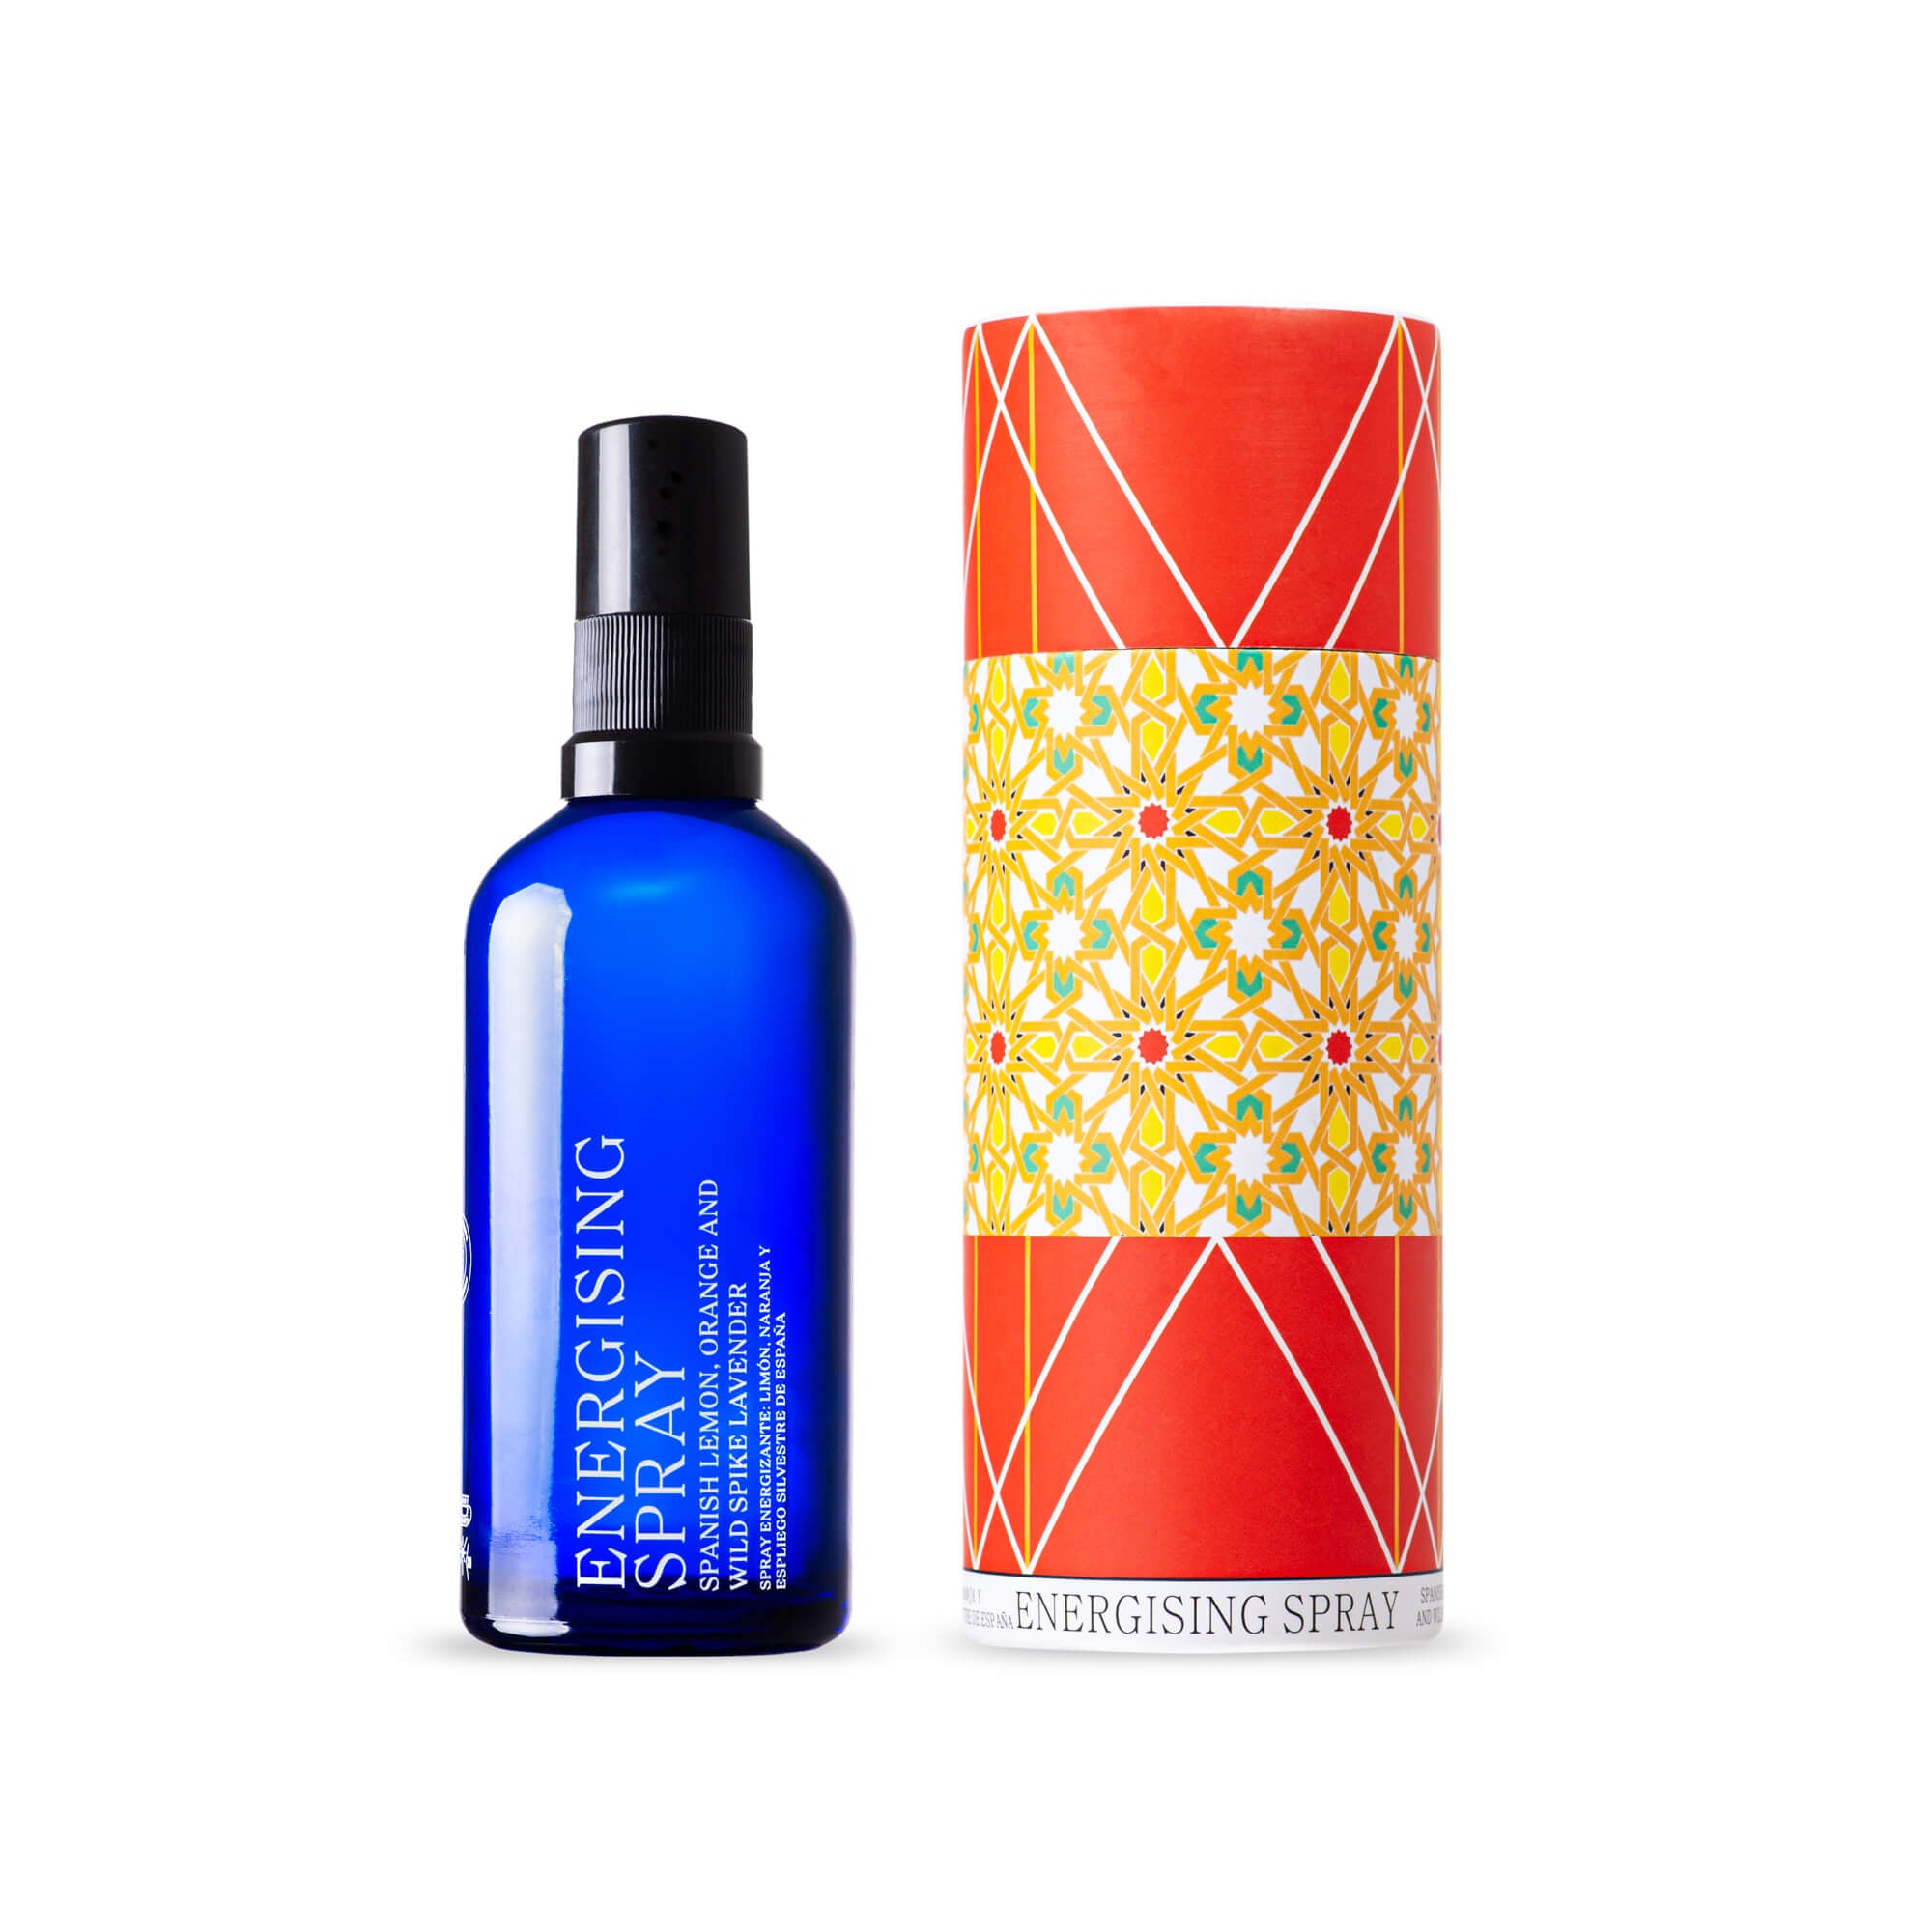 andaluz energising spray in a bright blue glass bottle with a black cap. It comes with a bright cylindrical box with spanish design inspired from the tiles at the alhambra palace in granada.